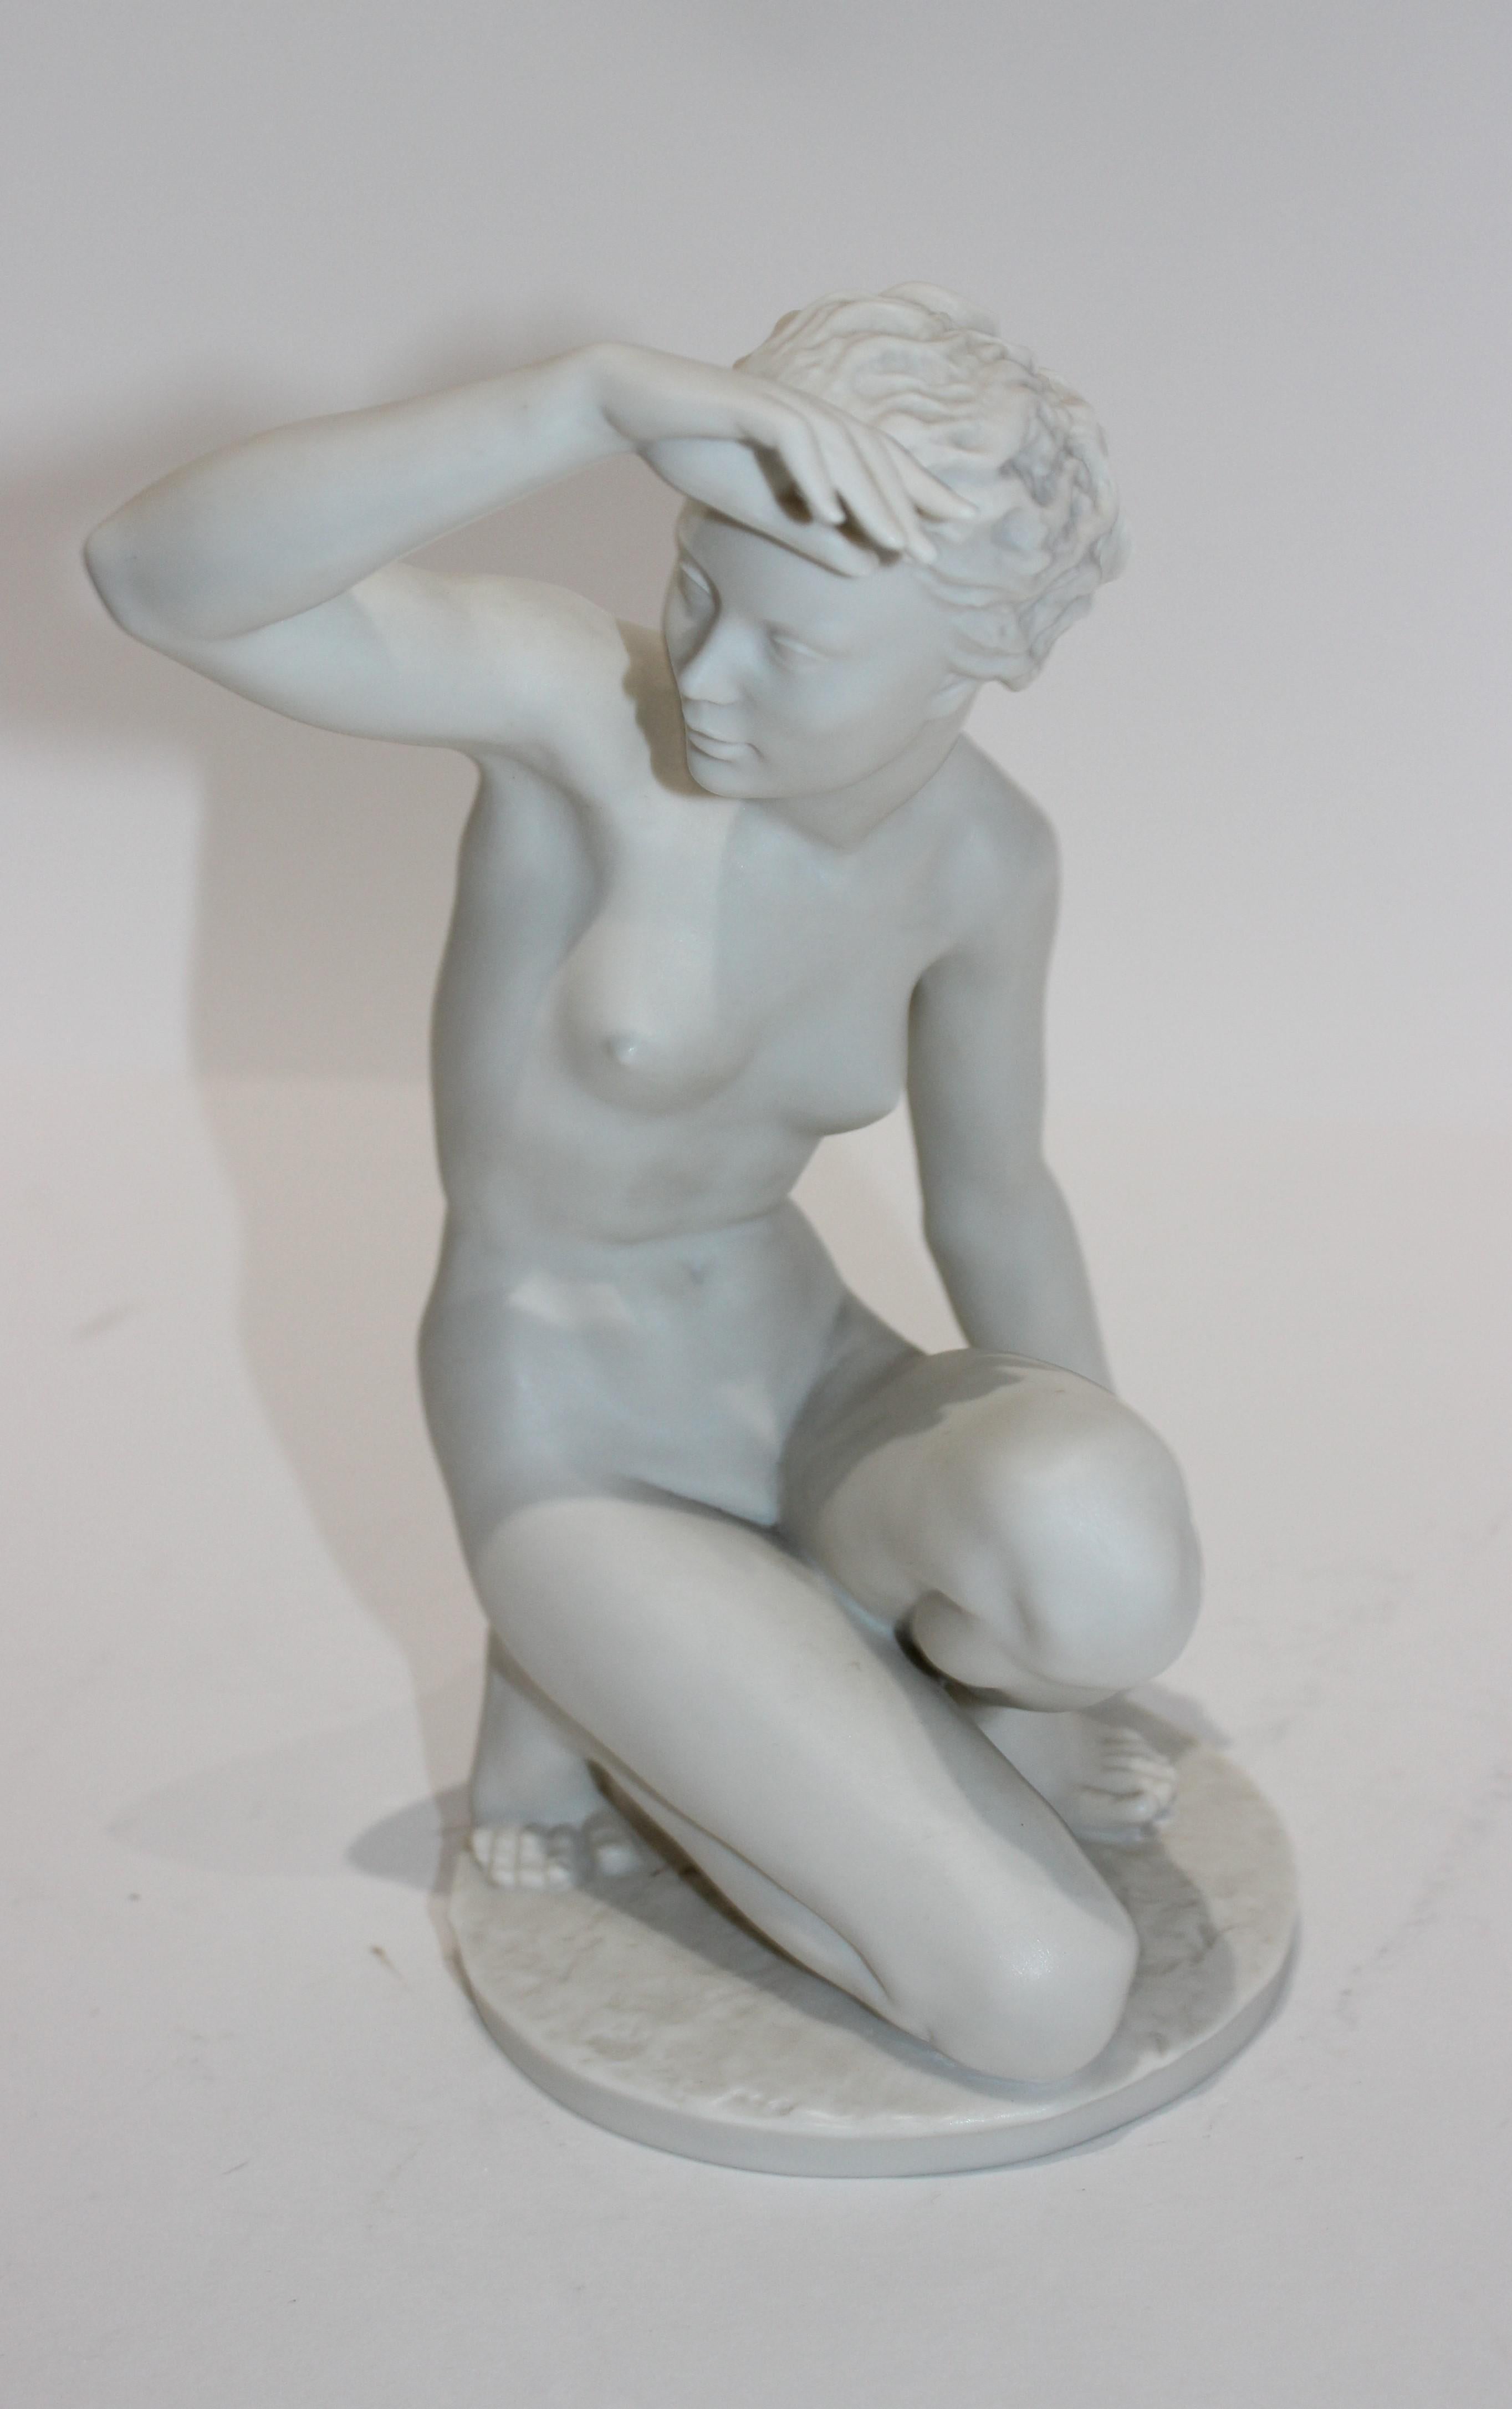 This stylish and chic figure of a young woman was originally cast in the late Art Deco modern period, and it exemlpified the ideal female form and idealized beauty. 

